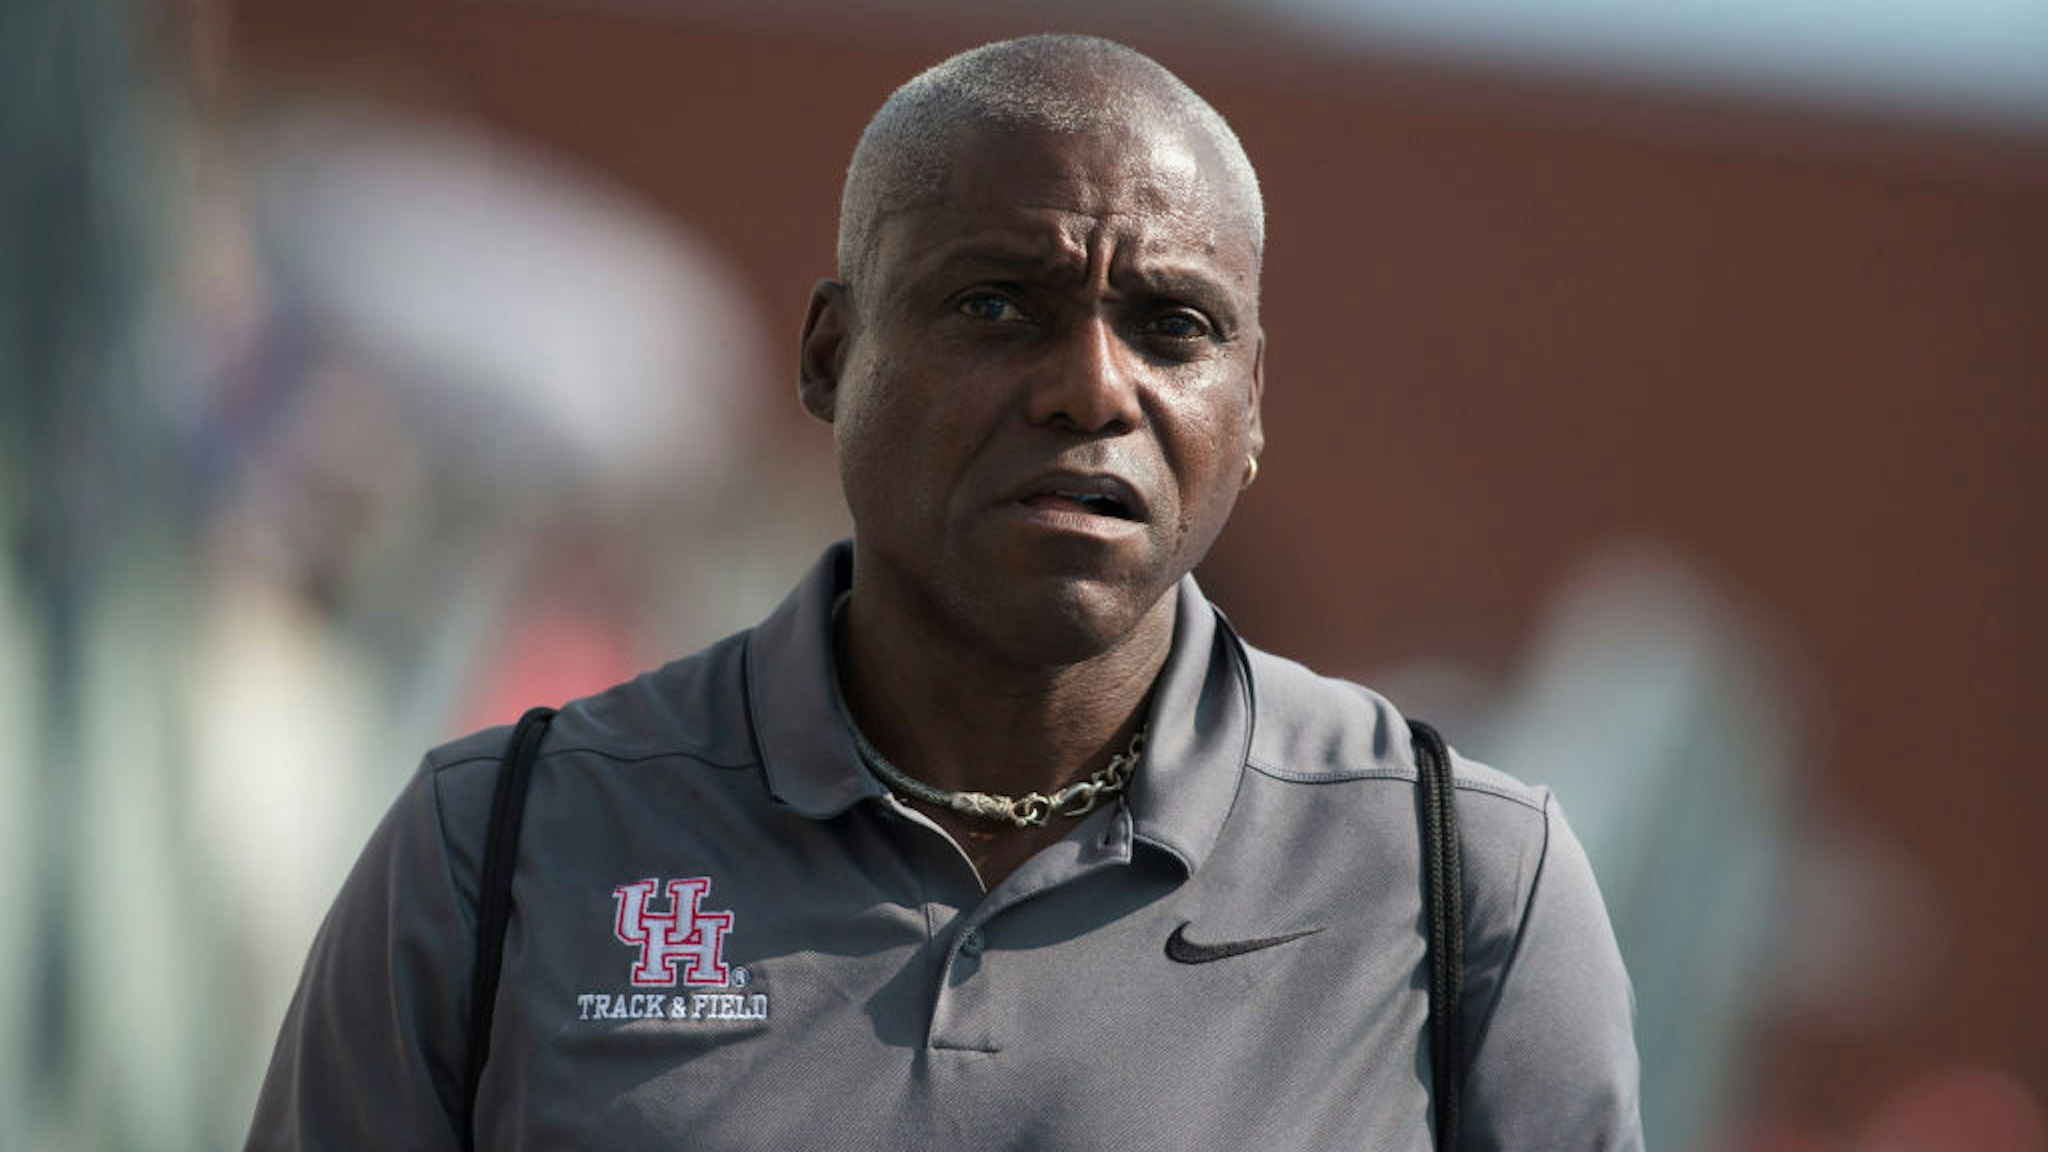 TORONTO, ON - AUGUST 11: Olympic great and University of Houston coach Carl Lewis at the 2018 North America, Central America, and Caribbean Athletics Association (NACAC) Track and Field Championships on August 11, 2018 held at Varsity Stadium, Toronto, Canada. (Photo by Sean Burges / Icon Sportswire).